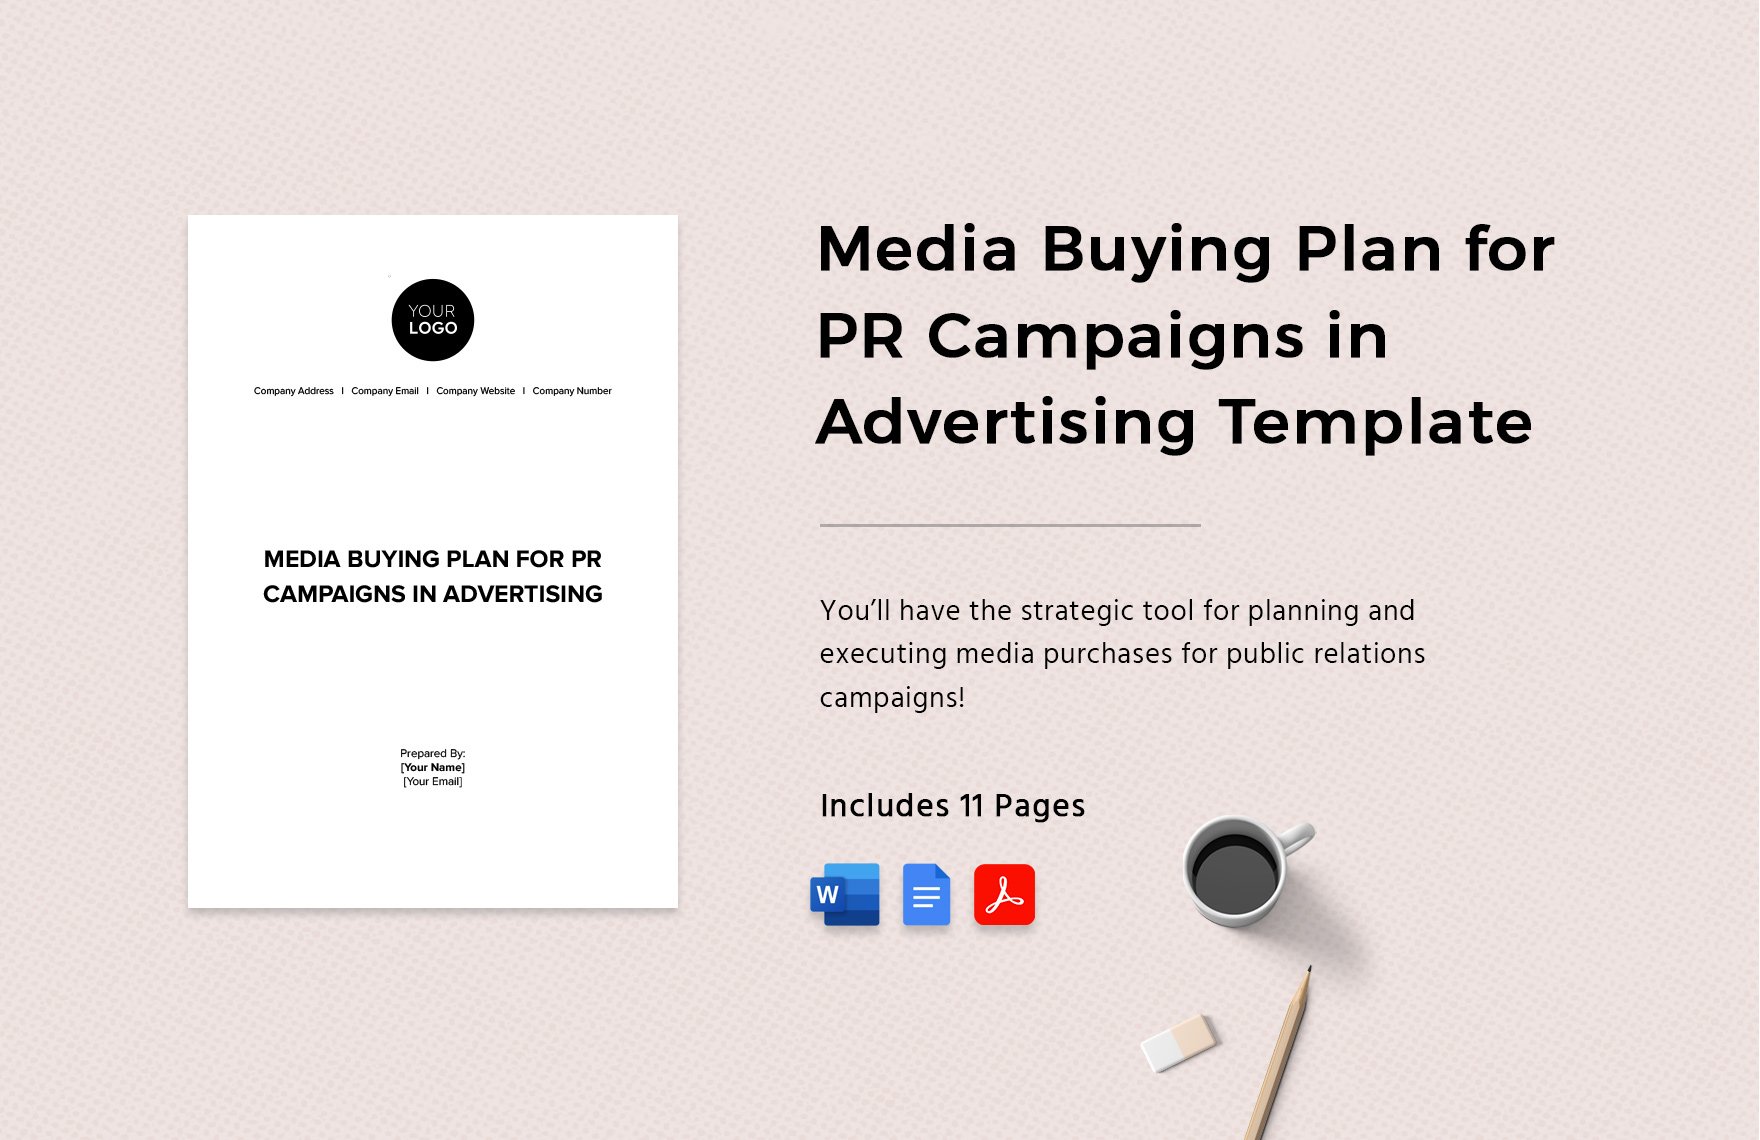 Media Buying Plan for PR Campaigns in Advertising Template